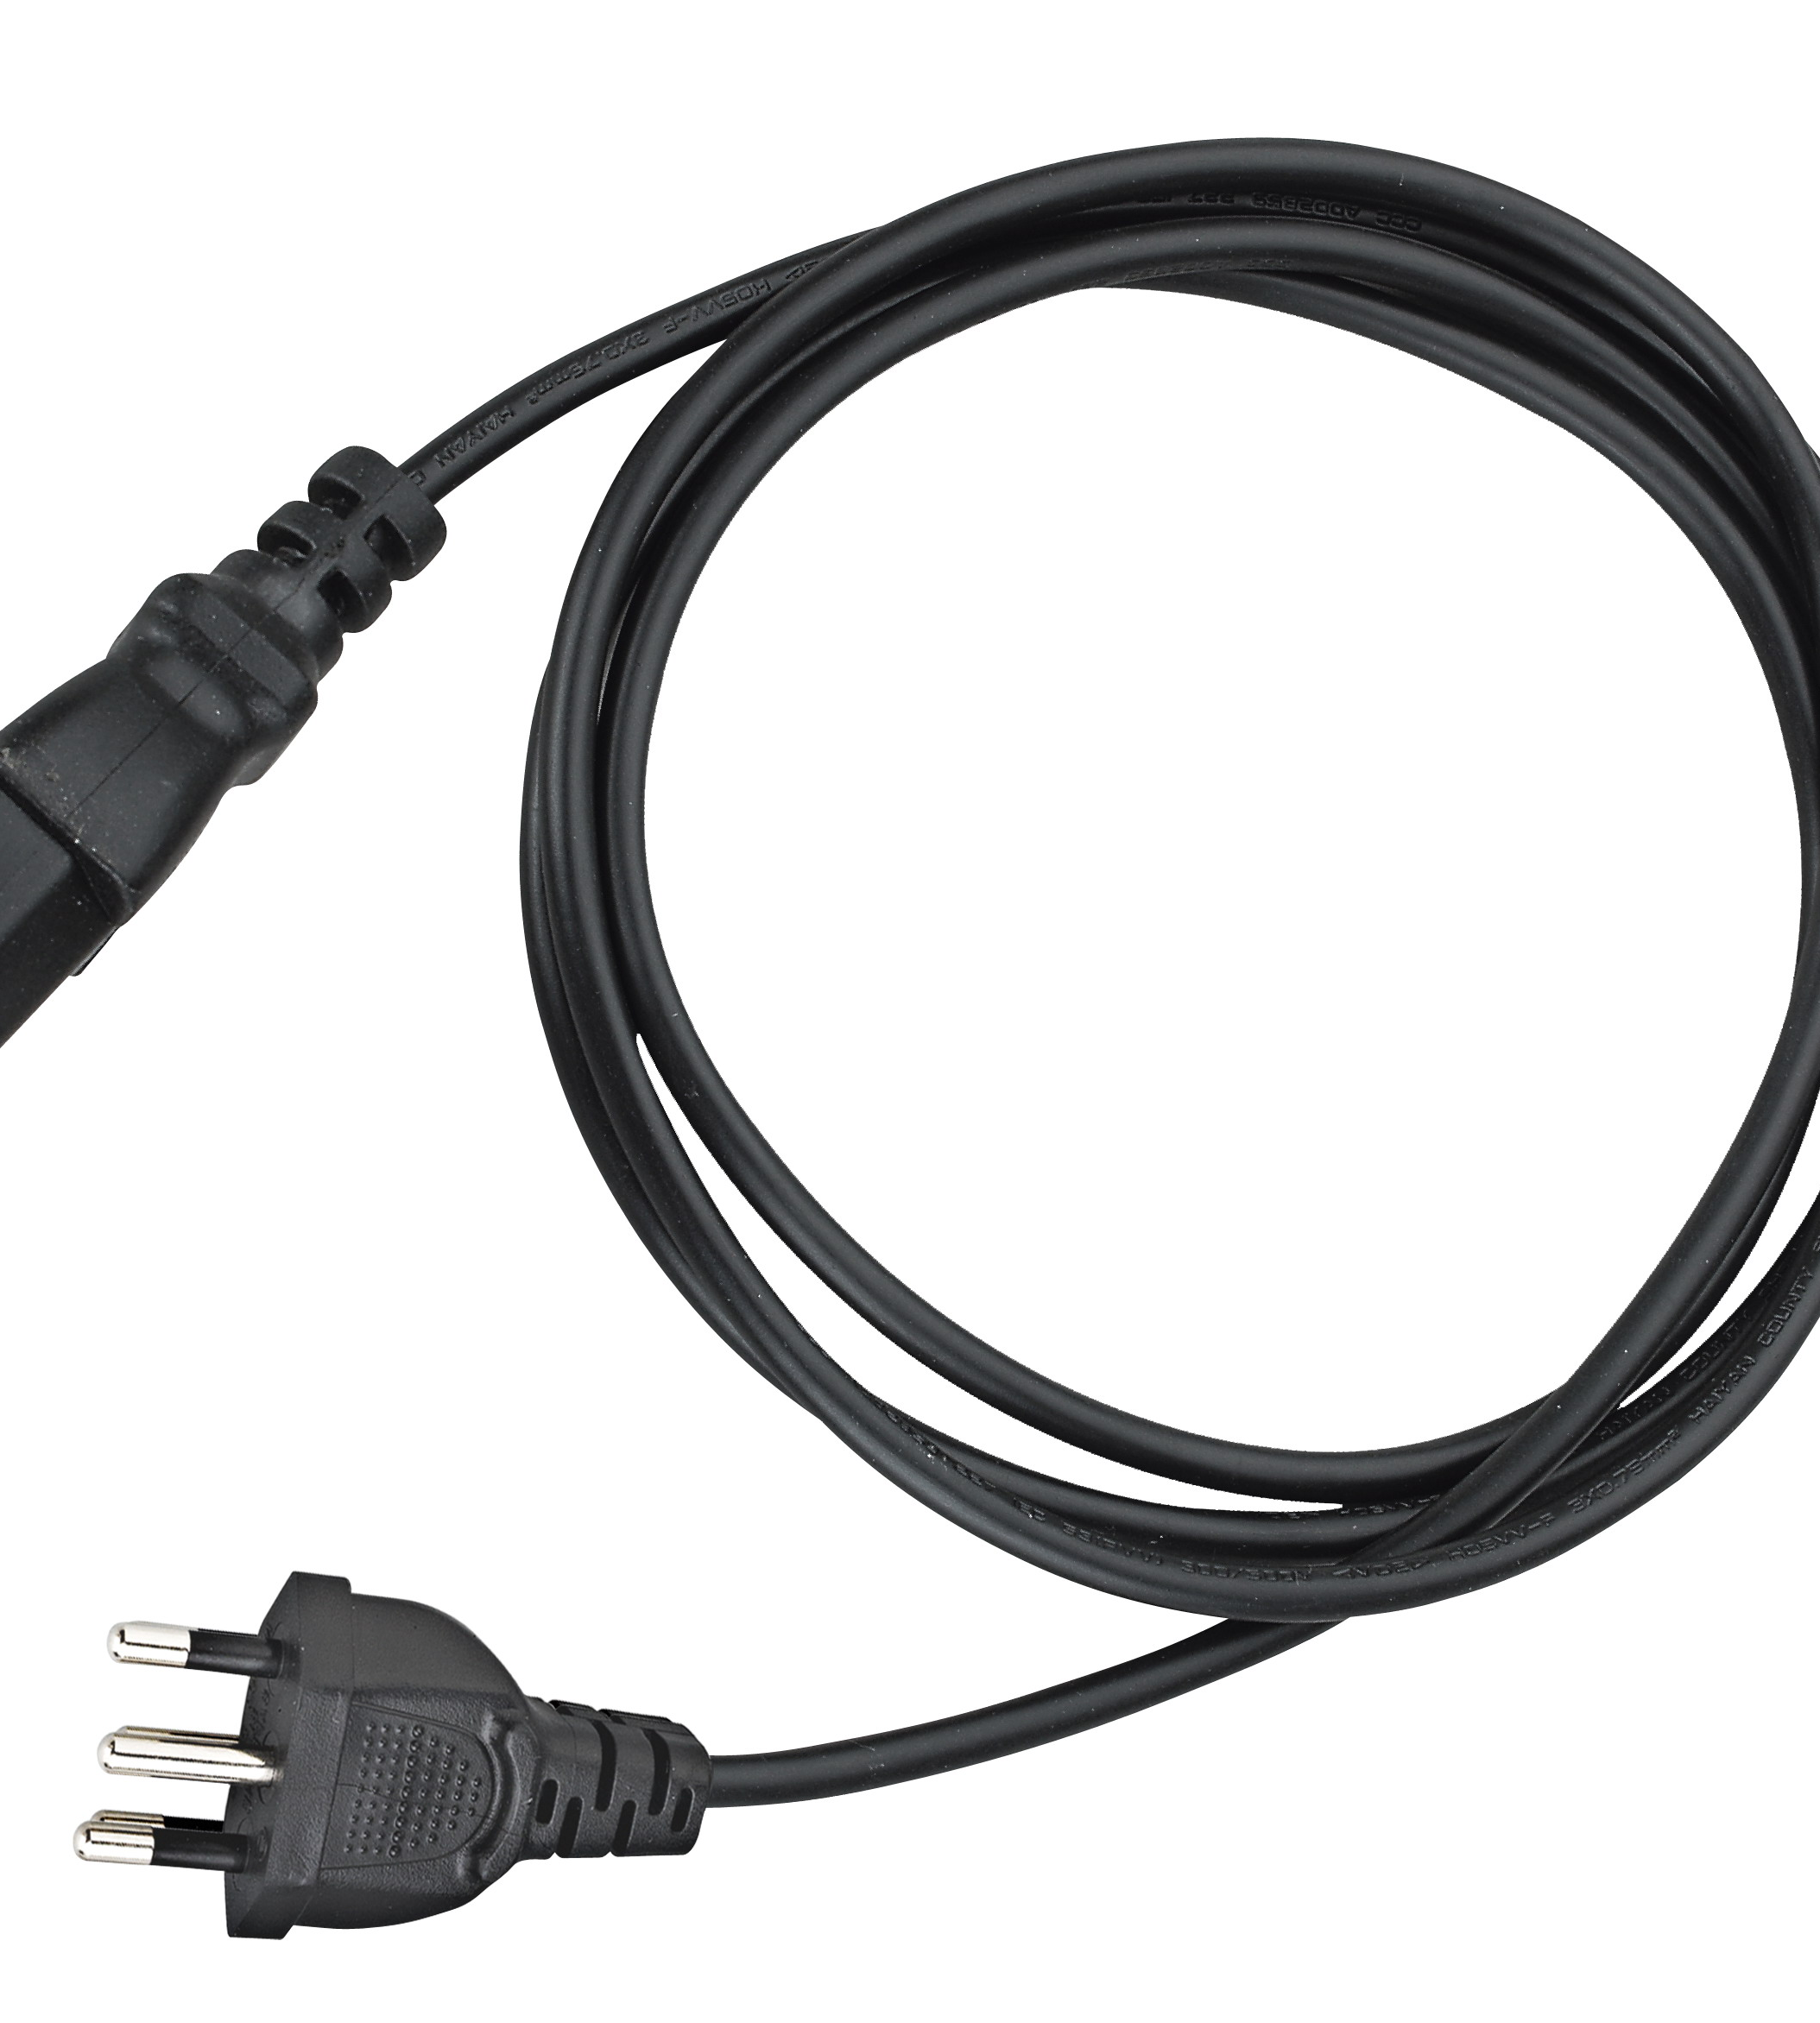 Buy Extension Cord | Extension Cord Price